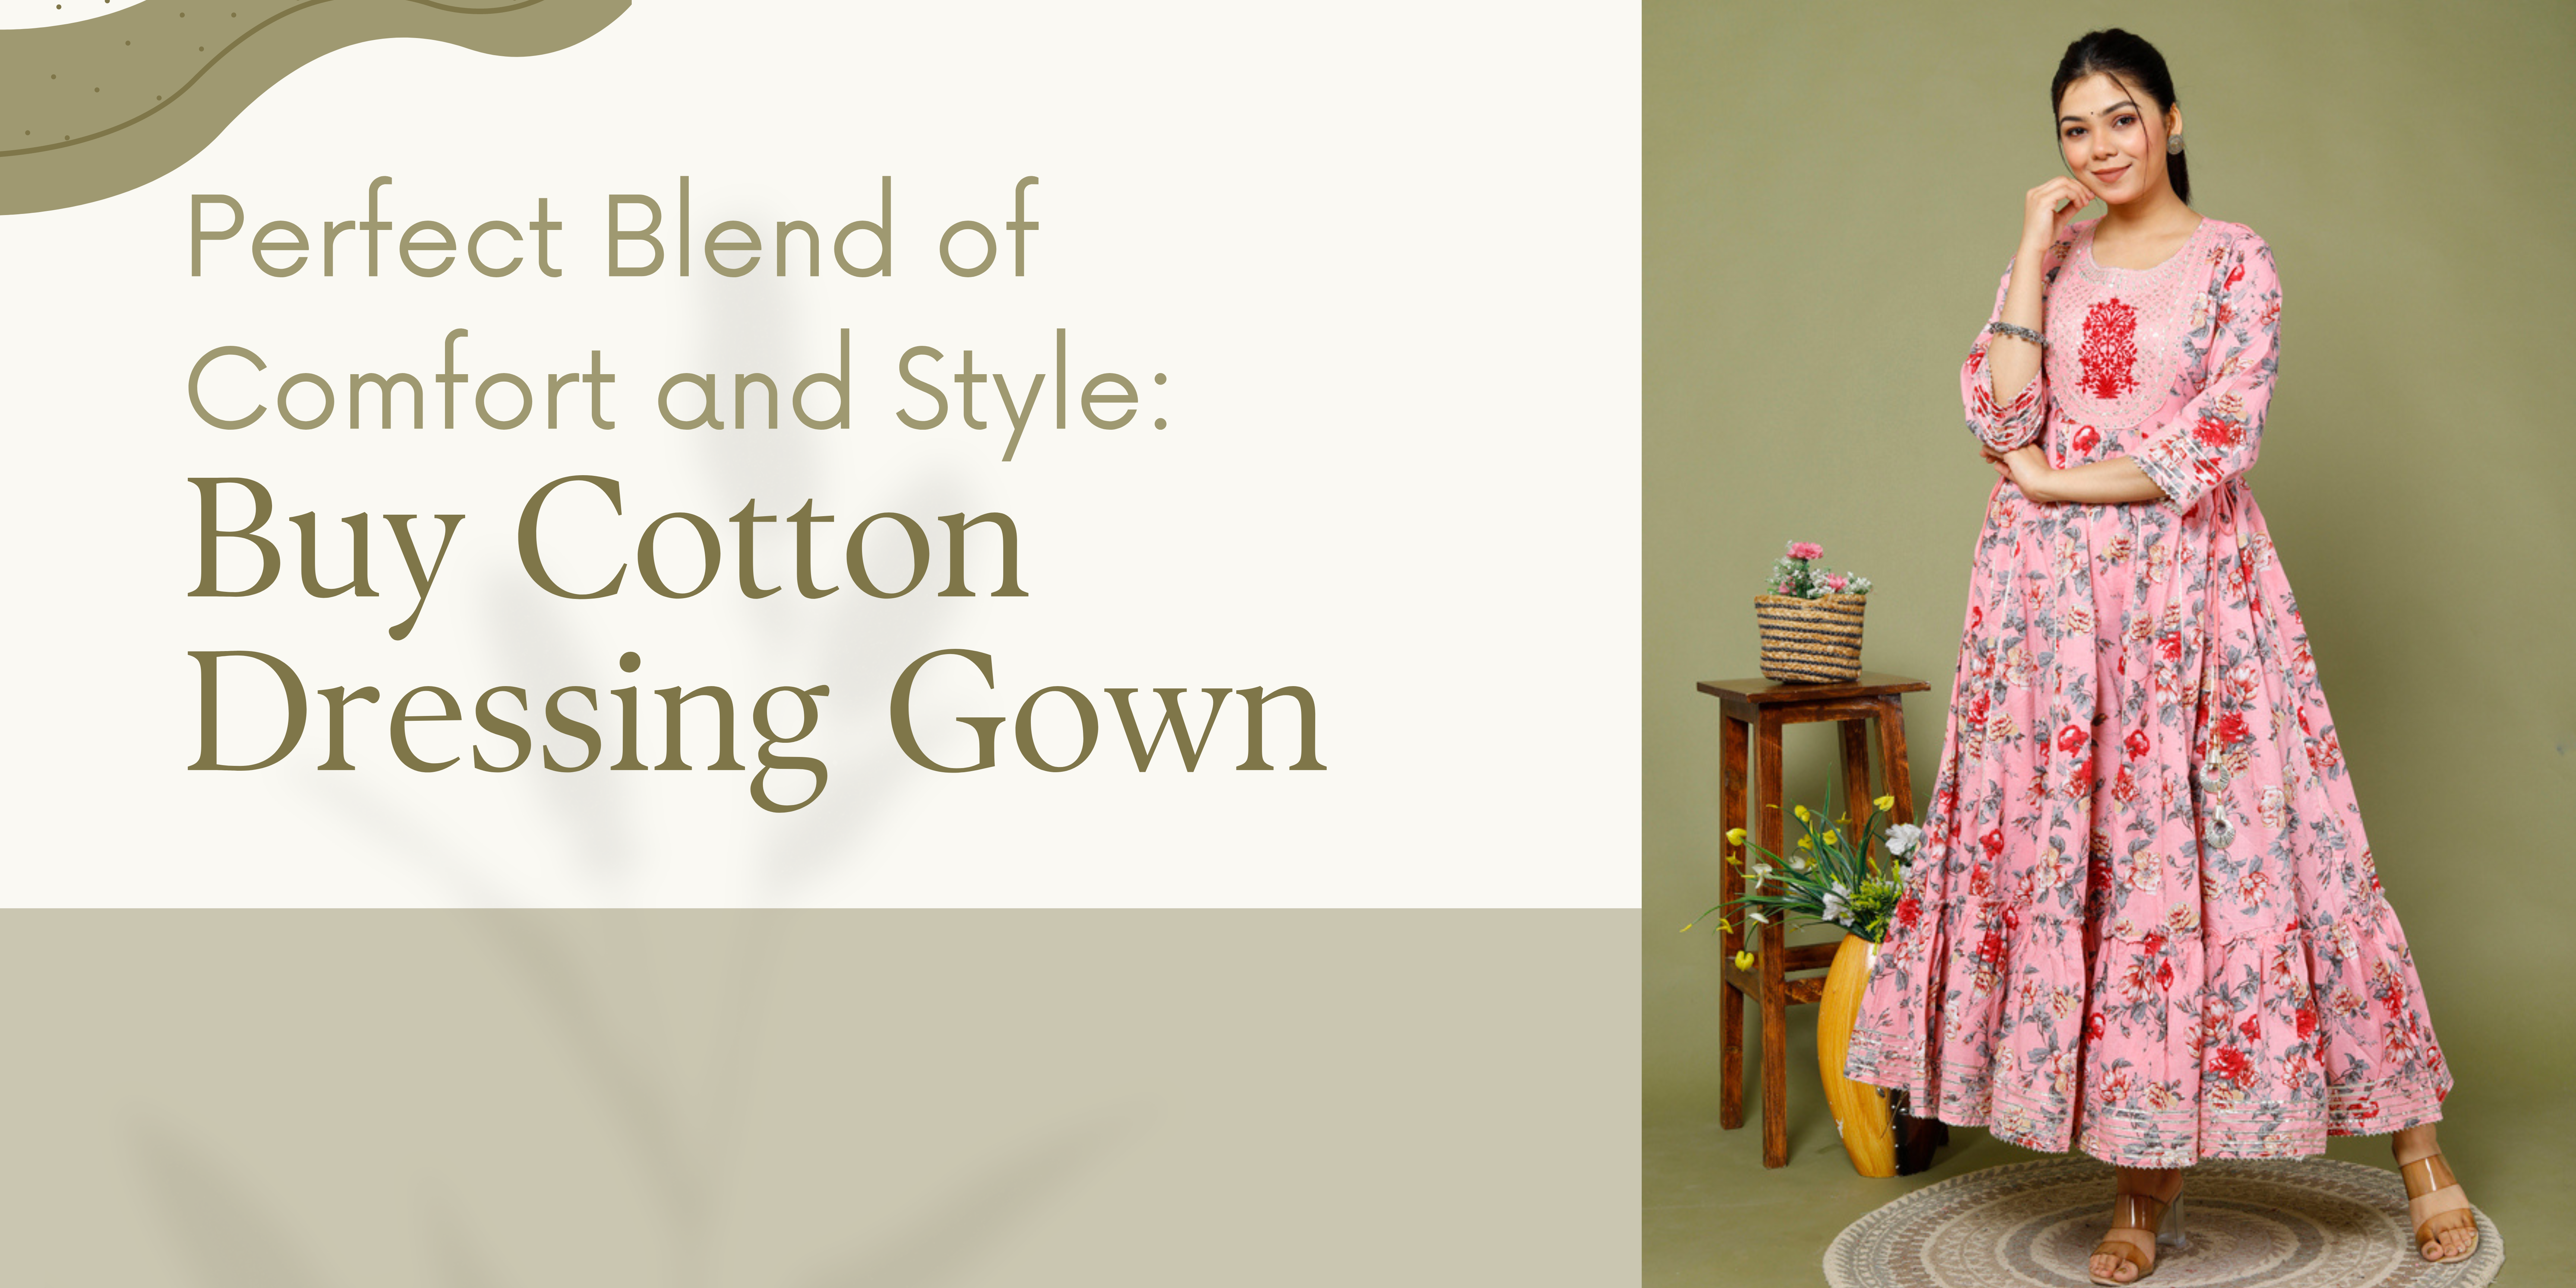 Perfect Blend of Comfort and Style: Buy Cotton Dressing Gown